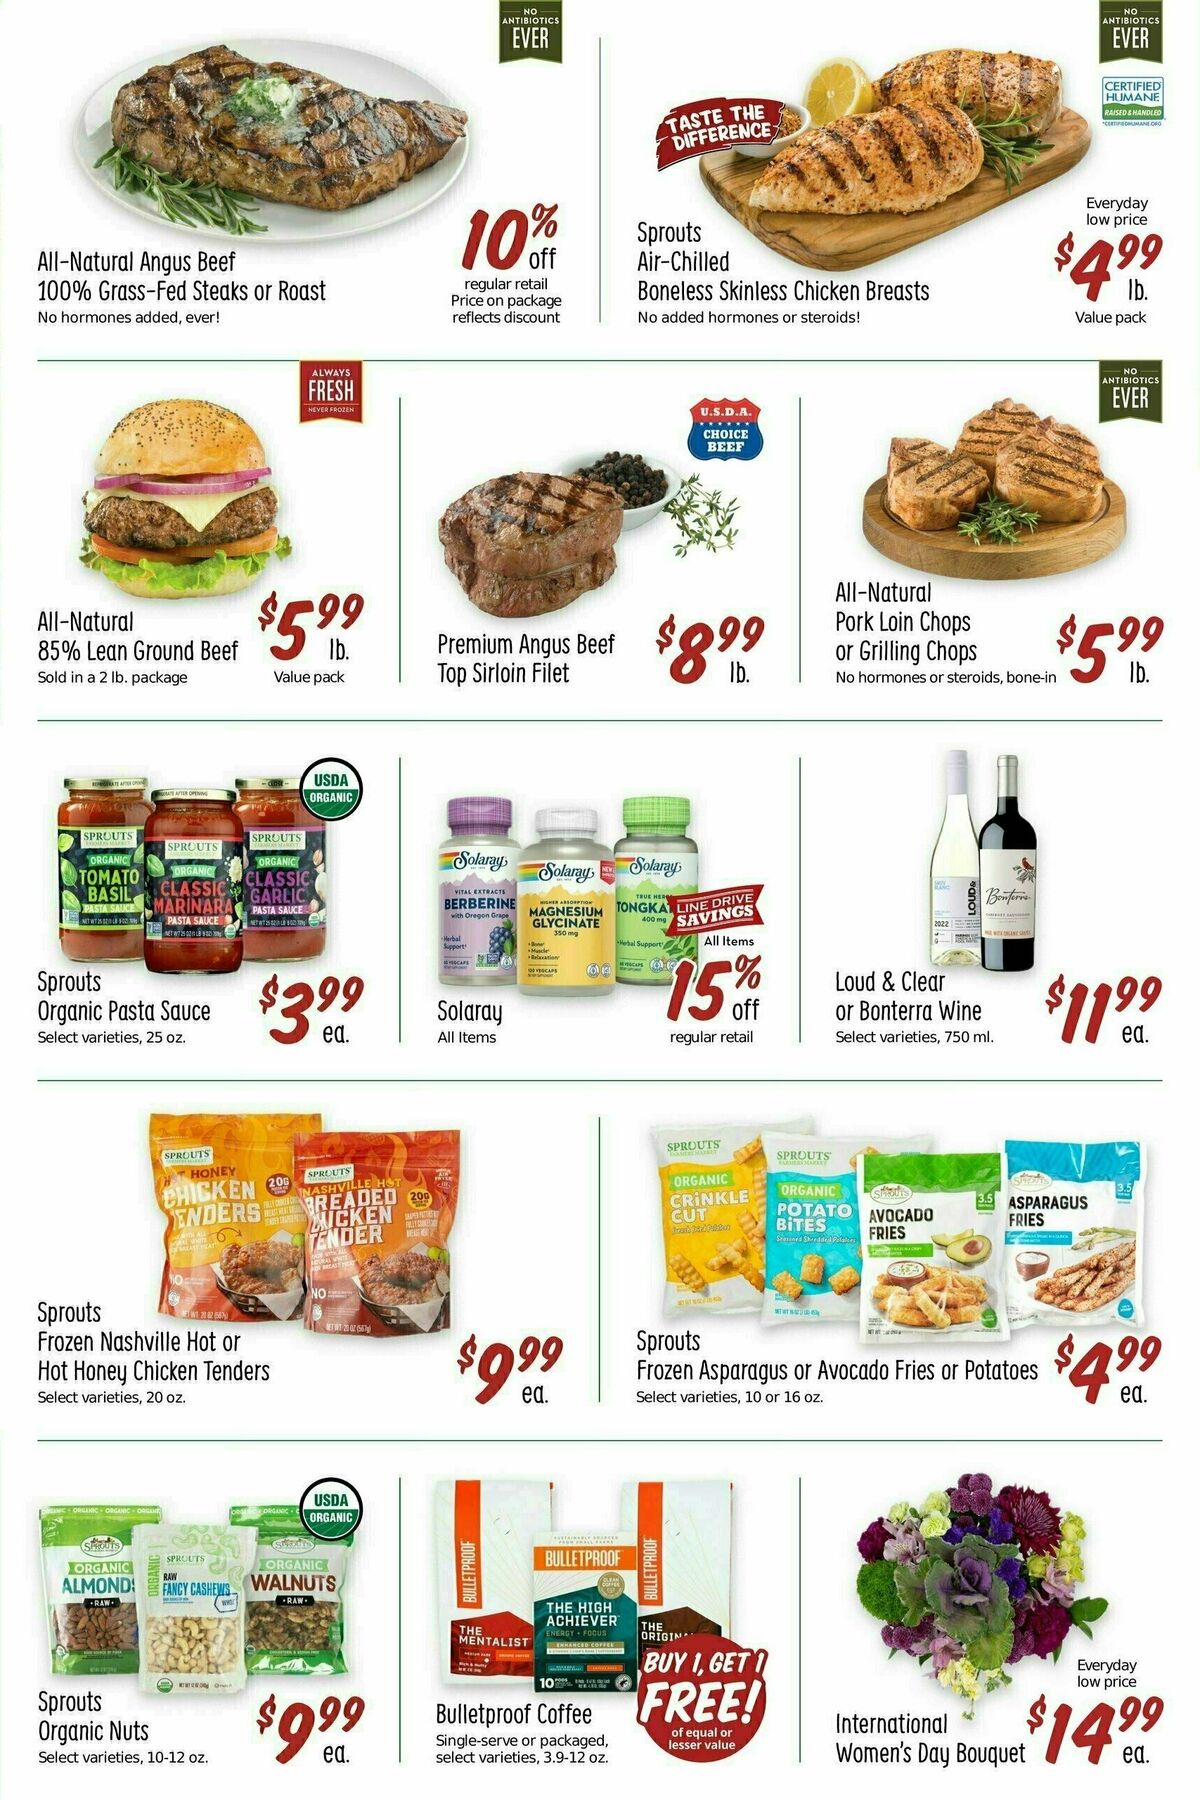 Sprouts Farmers Market Weekly Ad from March 6